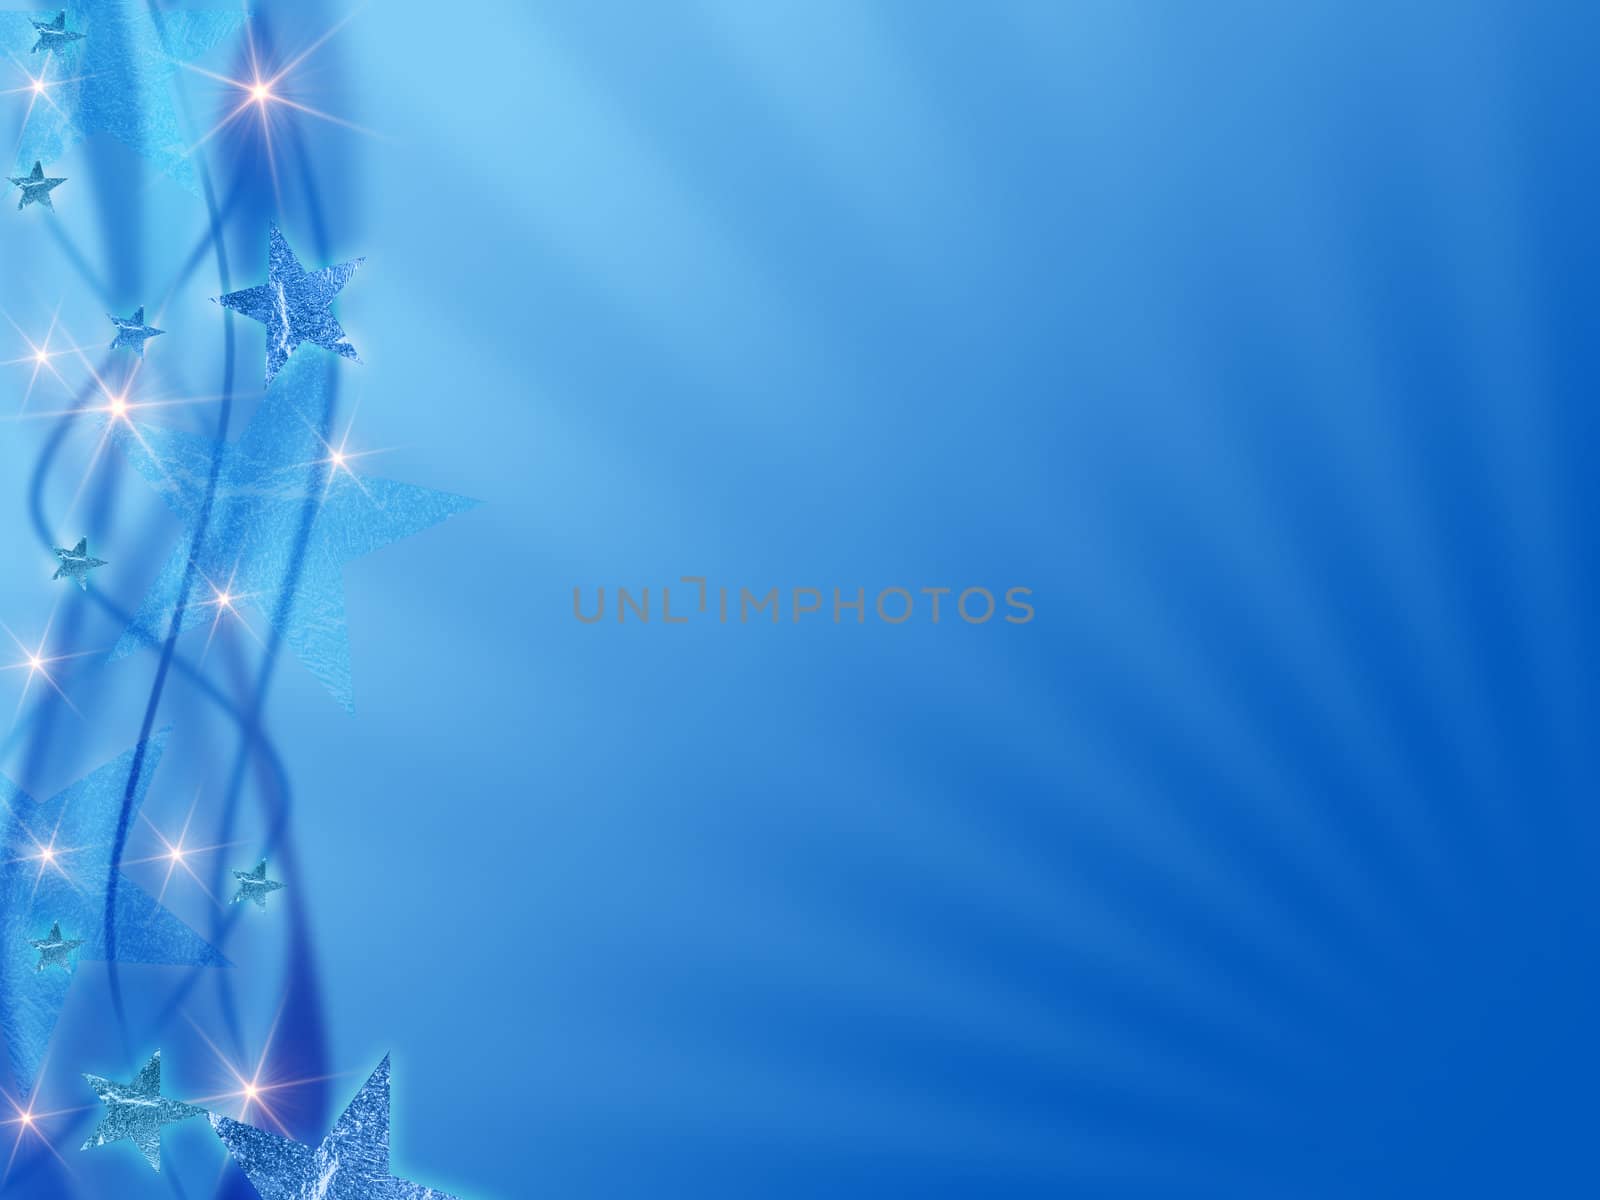 Christmas background with rays in blue by marinini